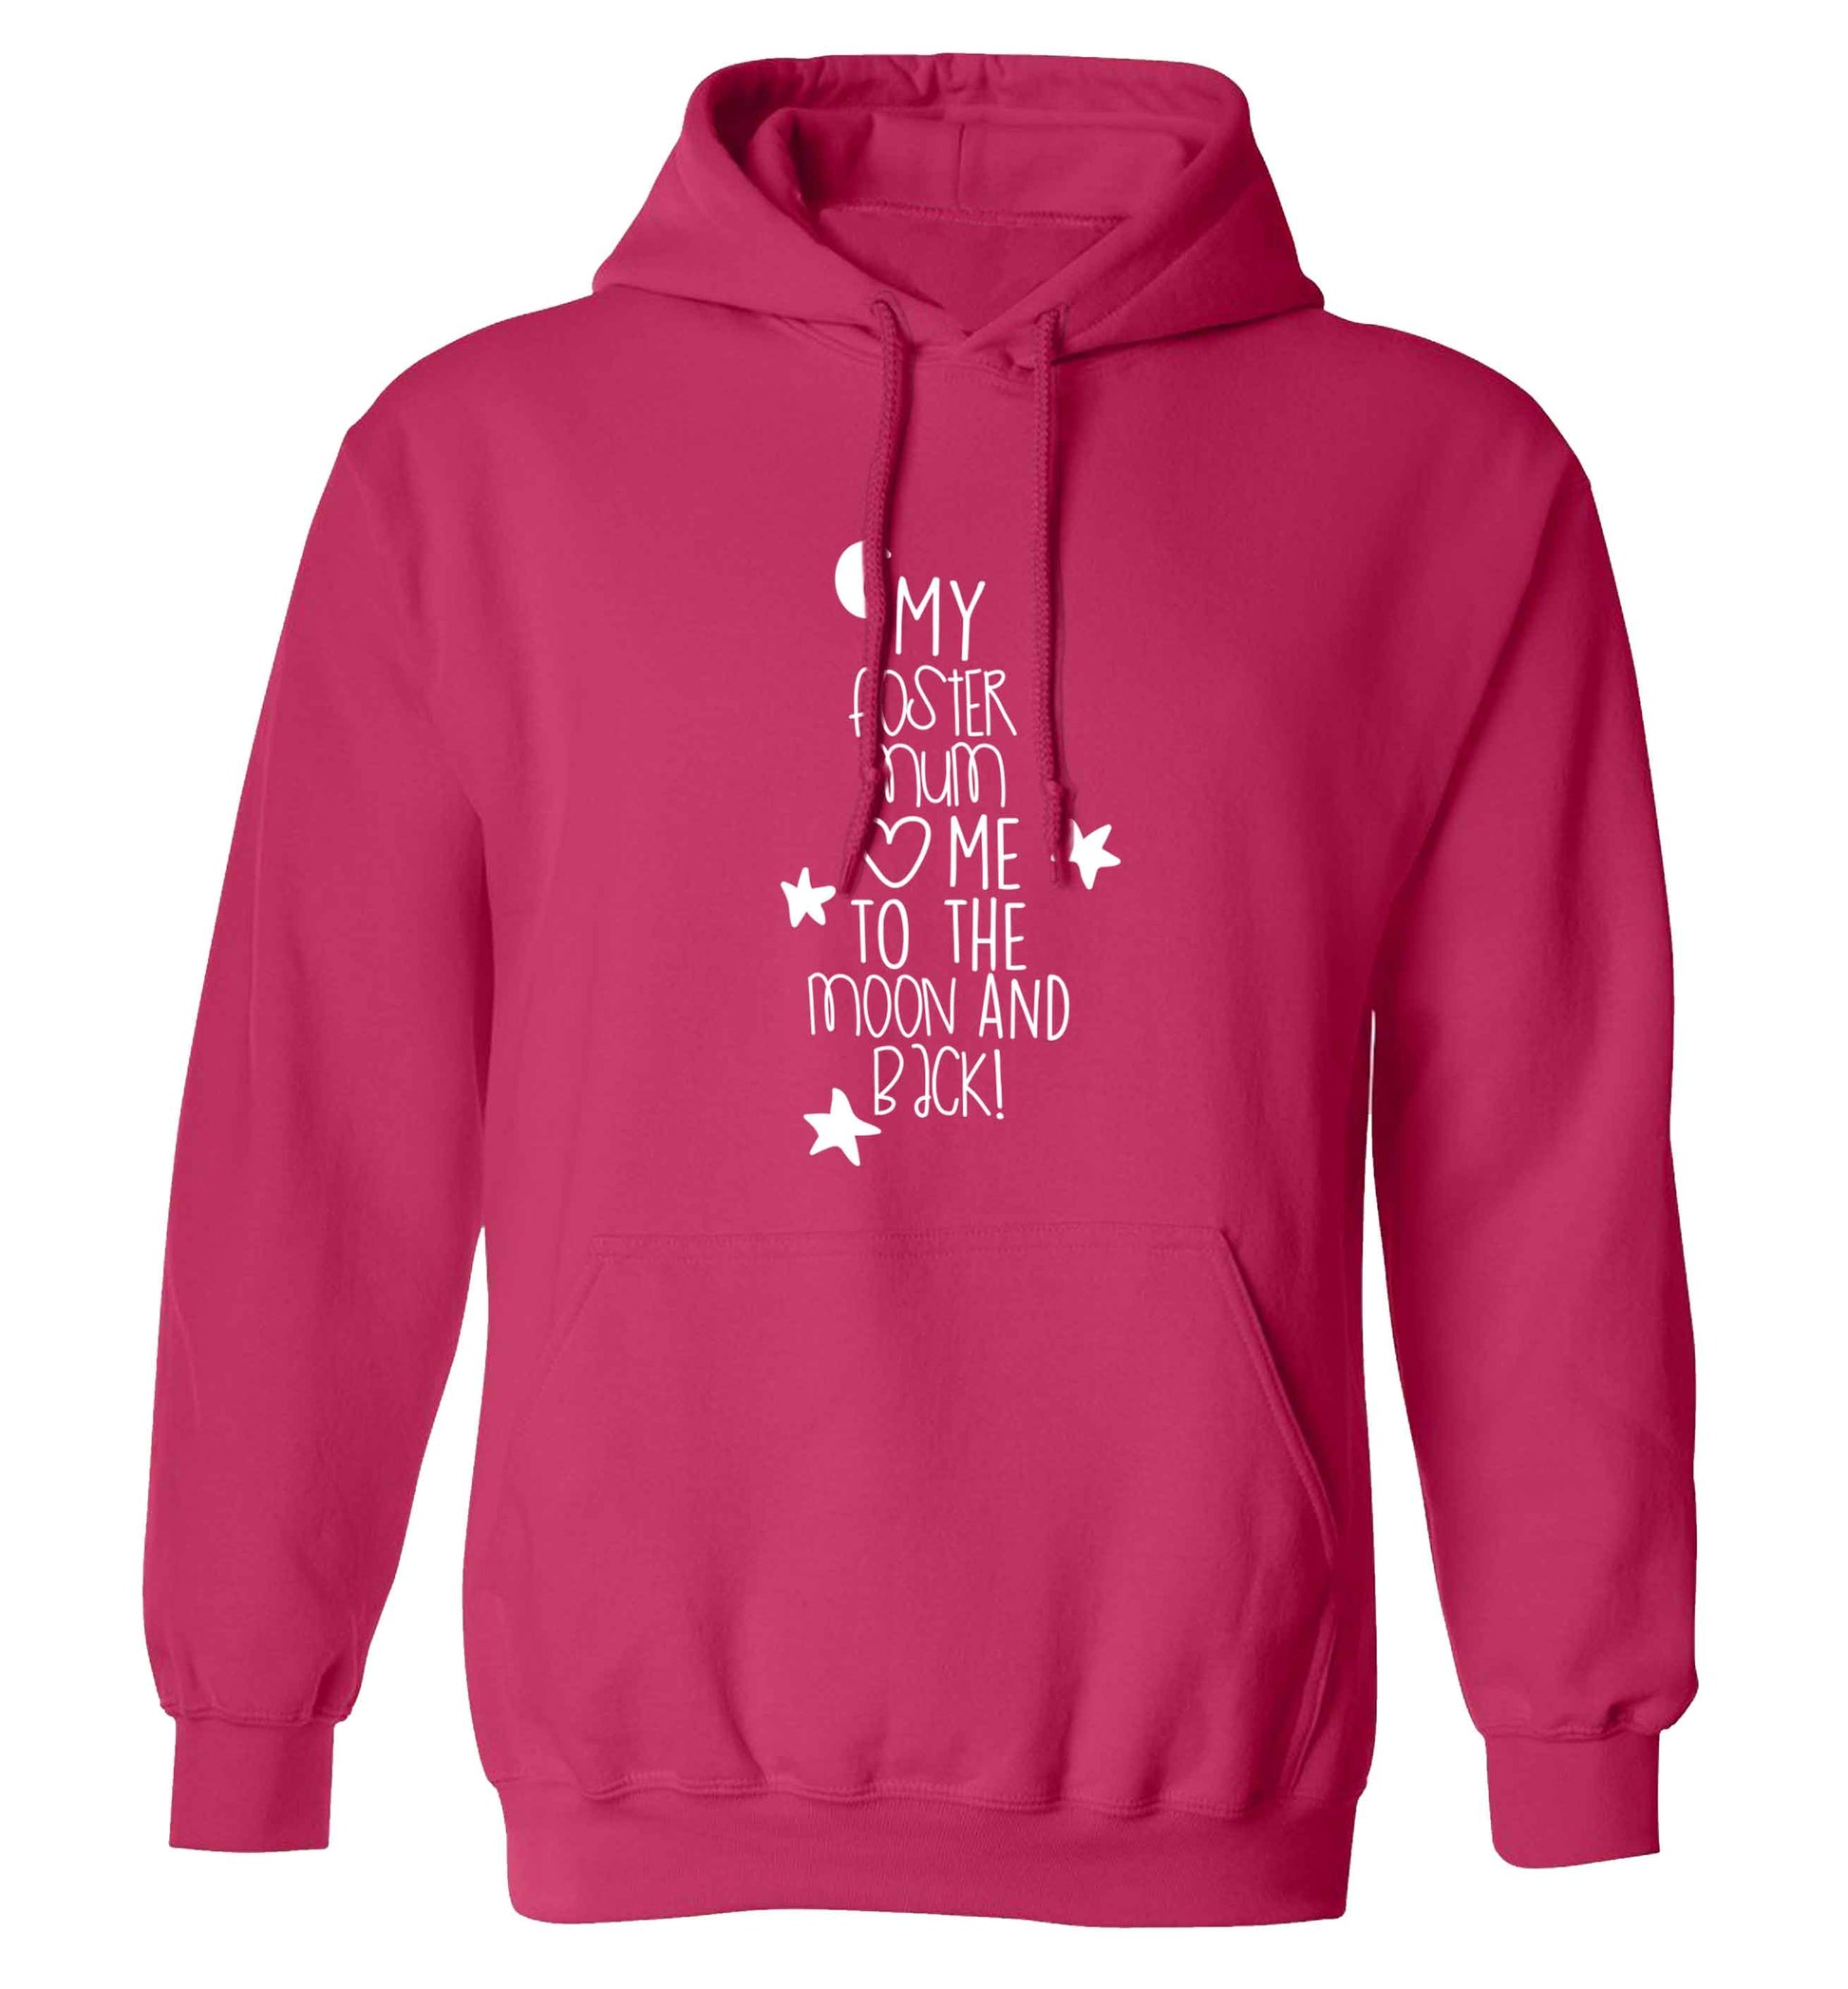 My foster mum loves me to the moon and back adults unisex pink hoodie 2XL